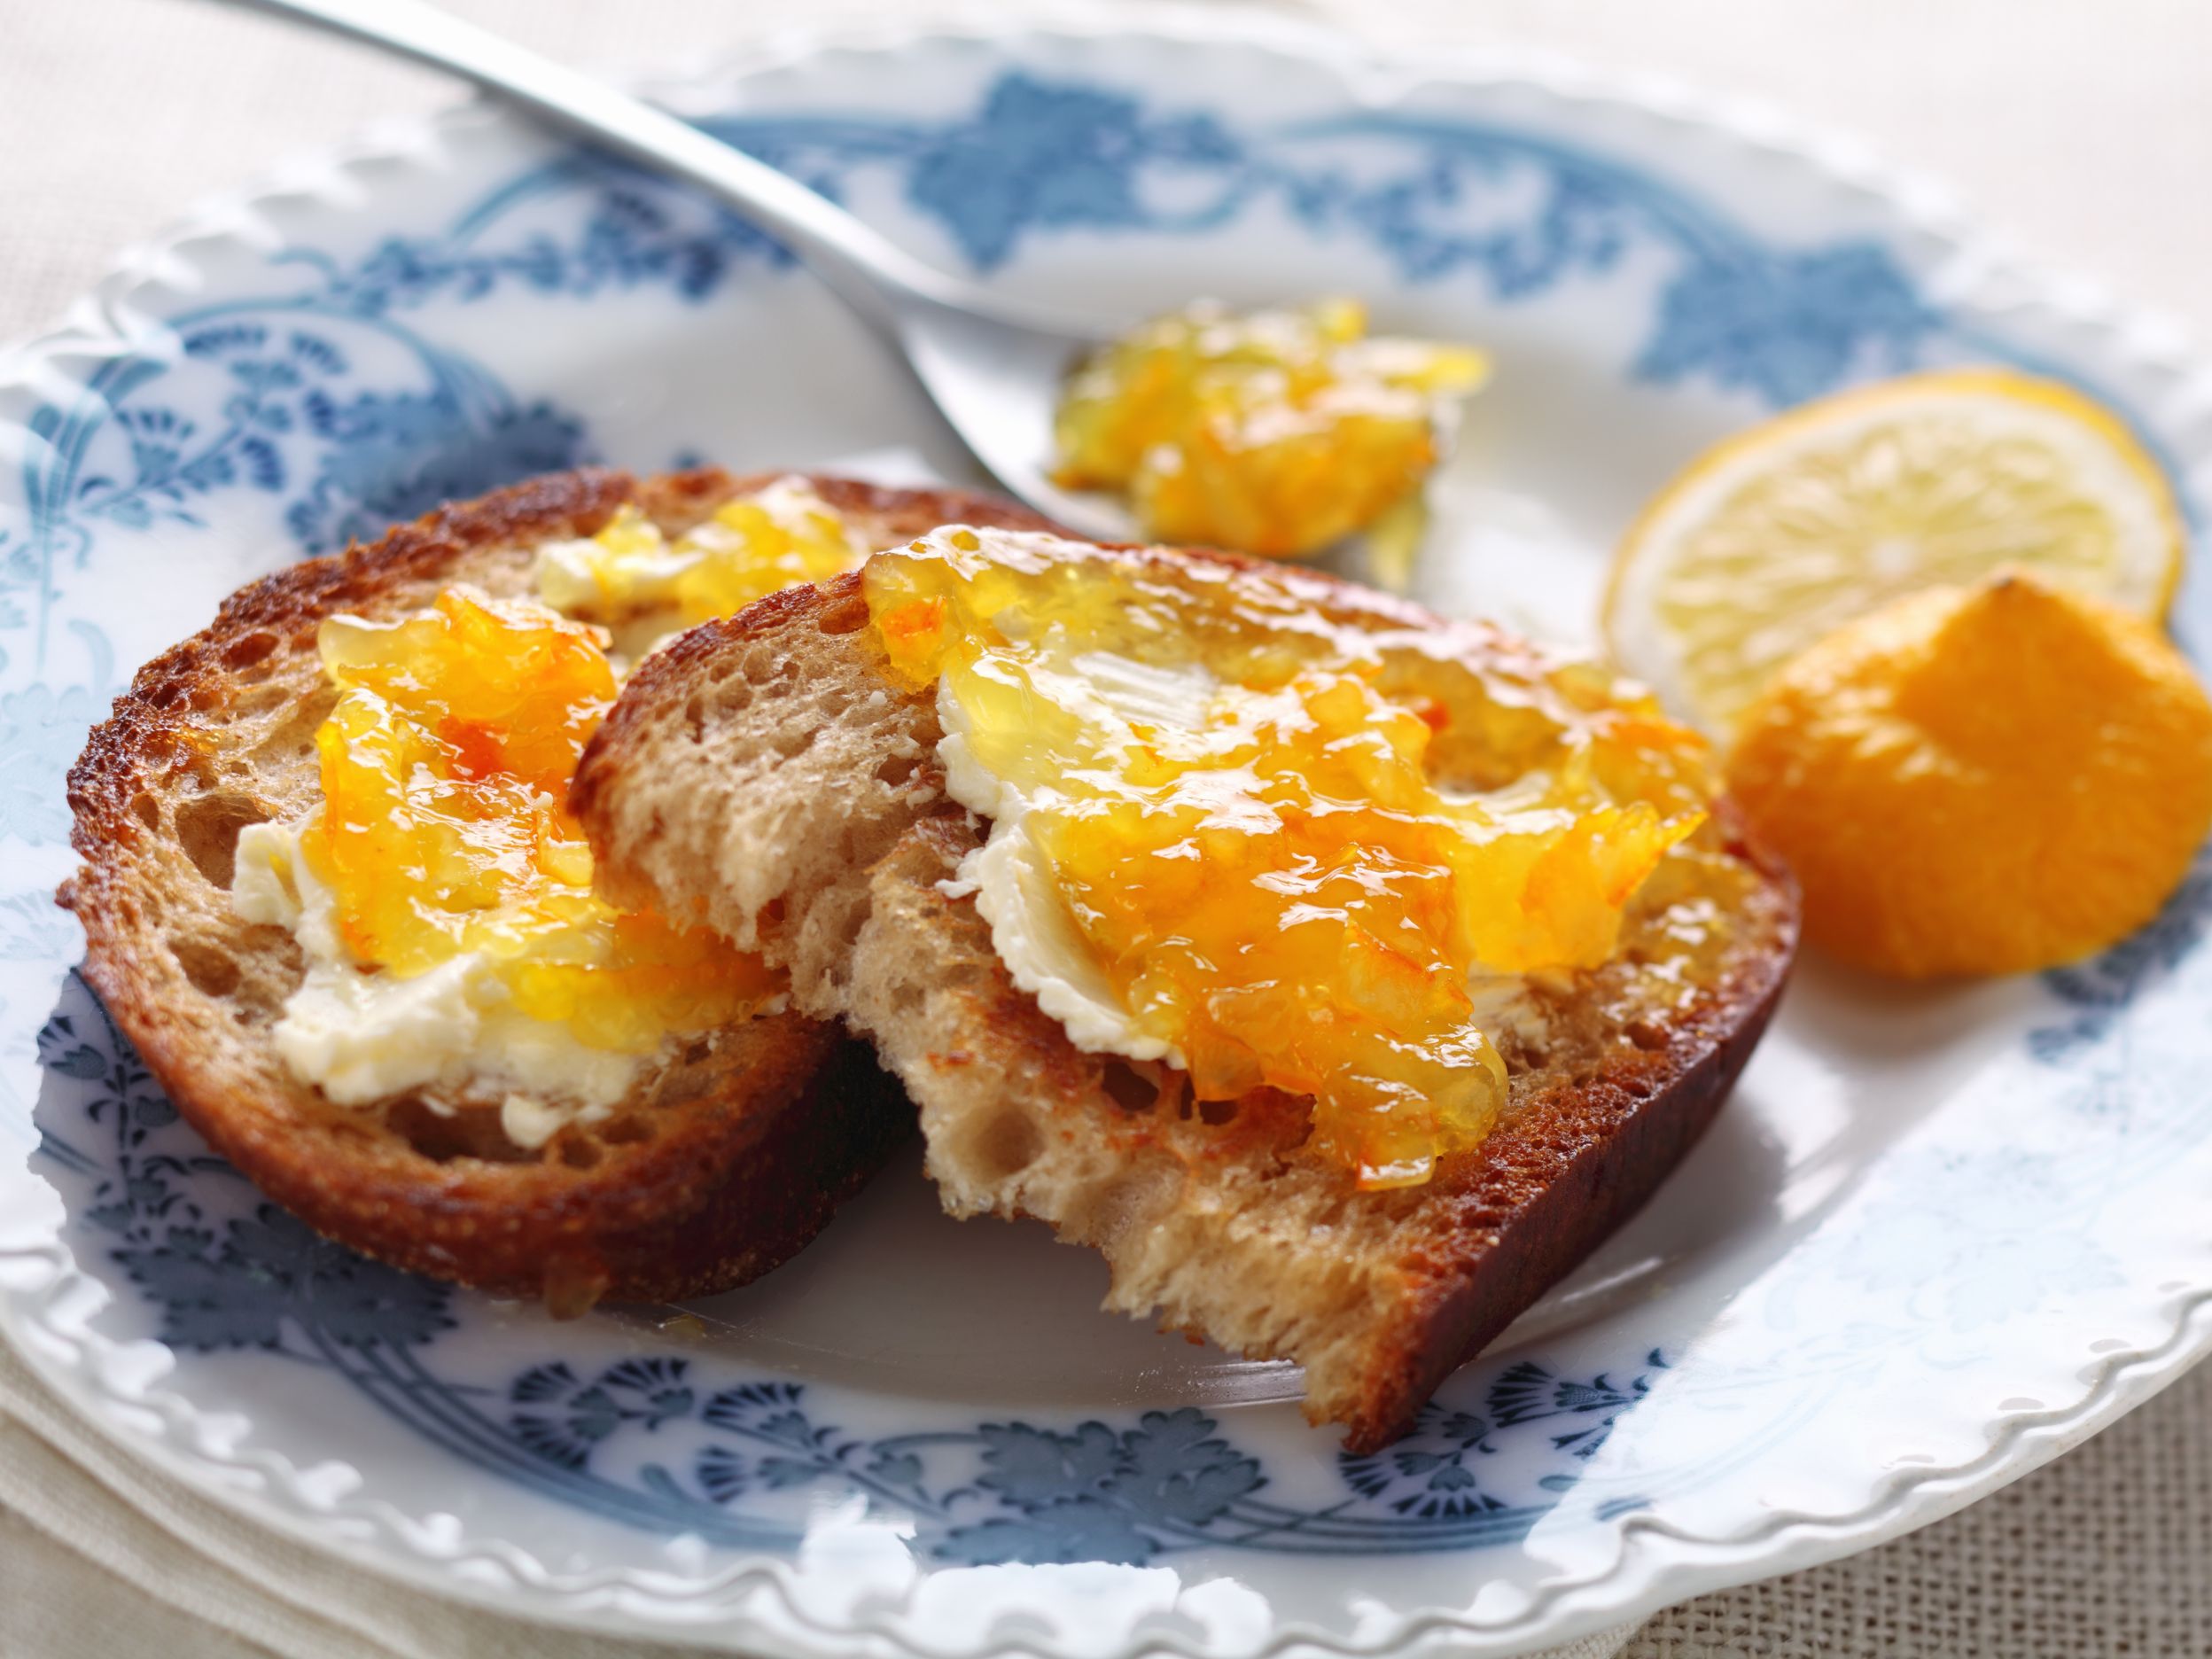 George Orwell's orange marmalade recipe was panned by the British Council